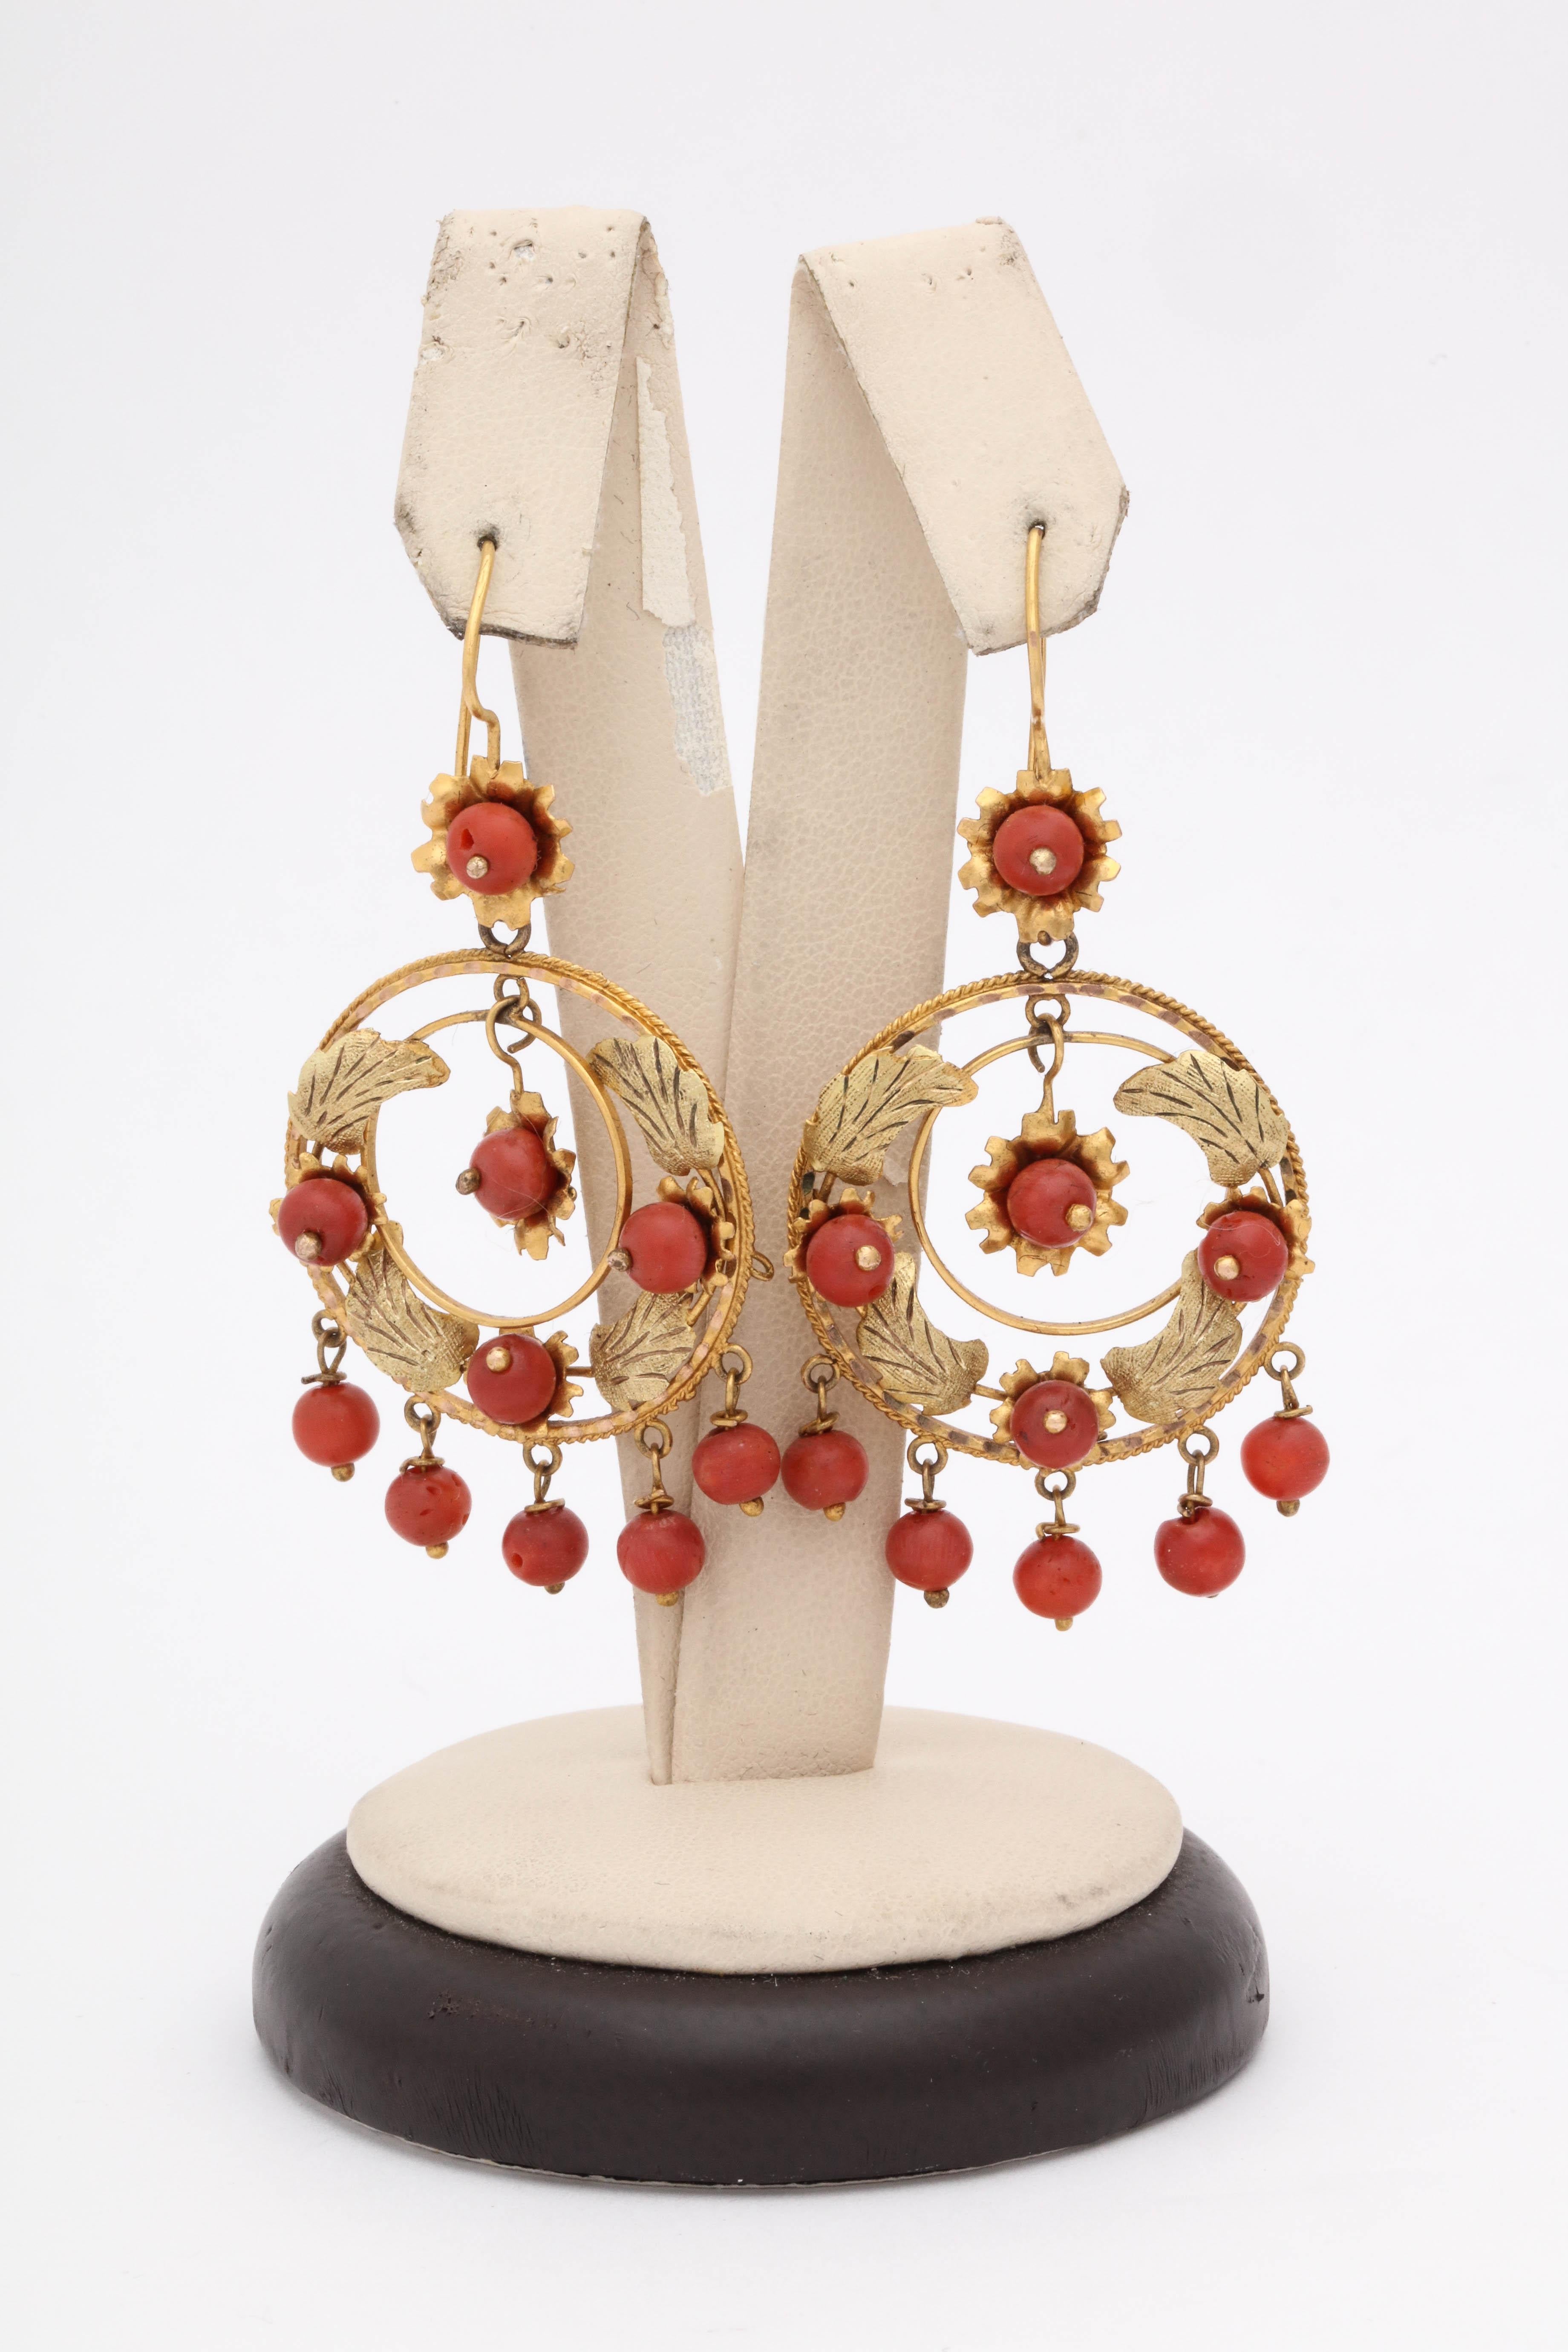 One Pair Of Ladies 18kt Gold Moveable And Flexible Gypsy Style Earrings Embellished With Twenty Coral Beads And Exhibiting Beautiful Handmade Leaf Design Gold Workmanship. For Pierced Ears Only With Shephards Hook Backing. Made In America In The